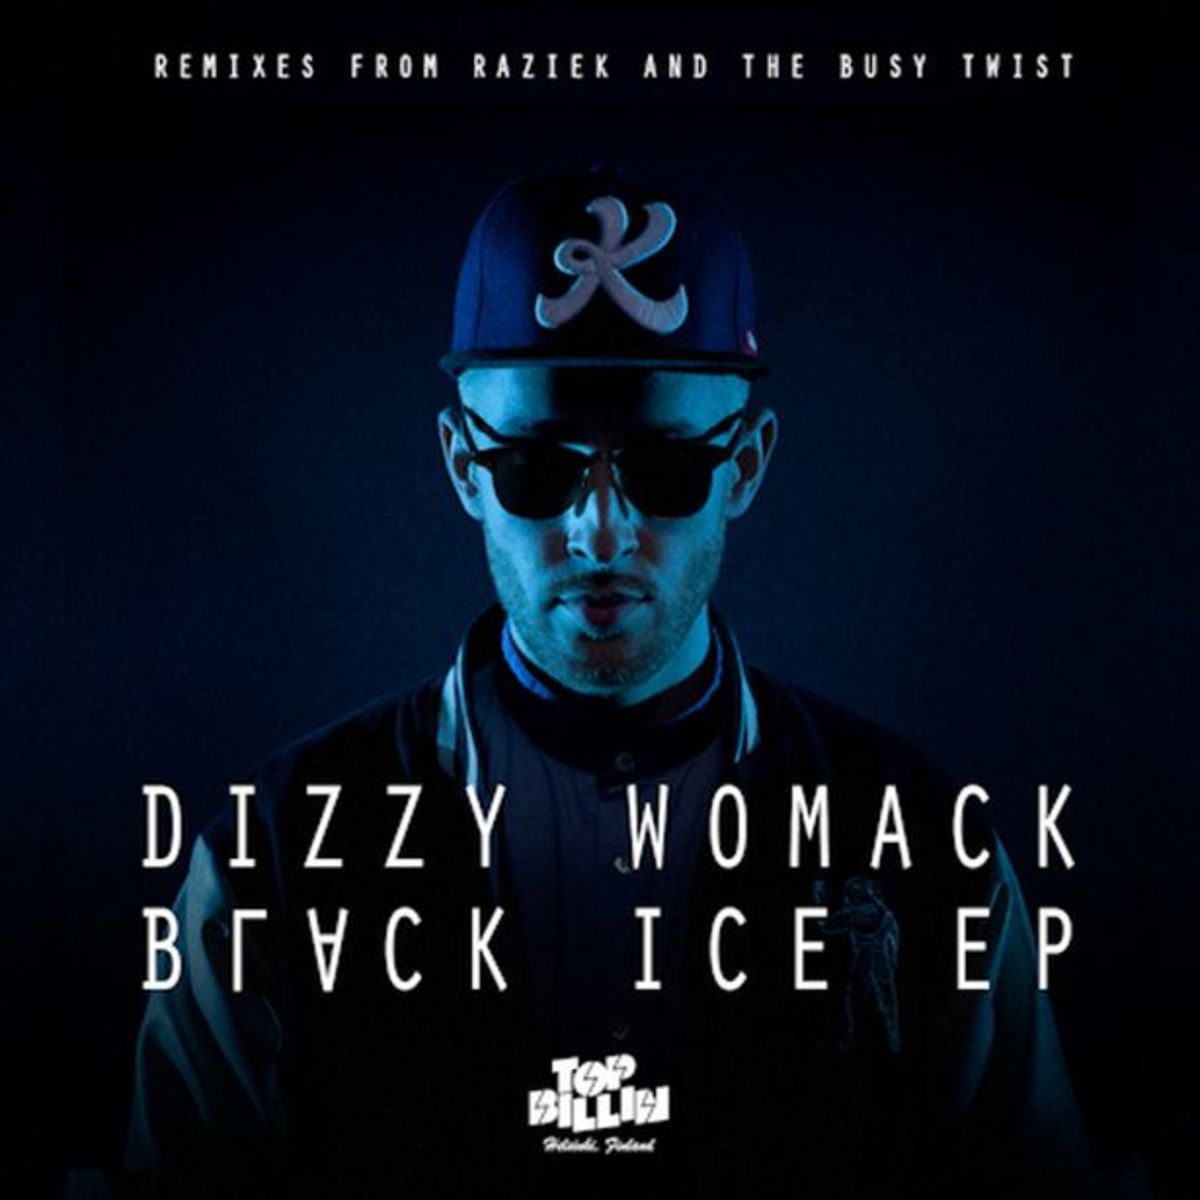 EDM News: Dizzy Womack Switches Up His Old DJ Dizzy Sound; Releases Black Ice EP- File Under Bass Heavy Filthy Club House